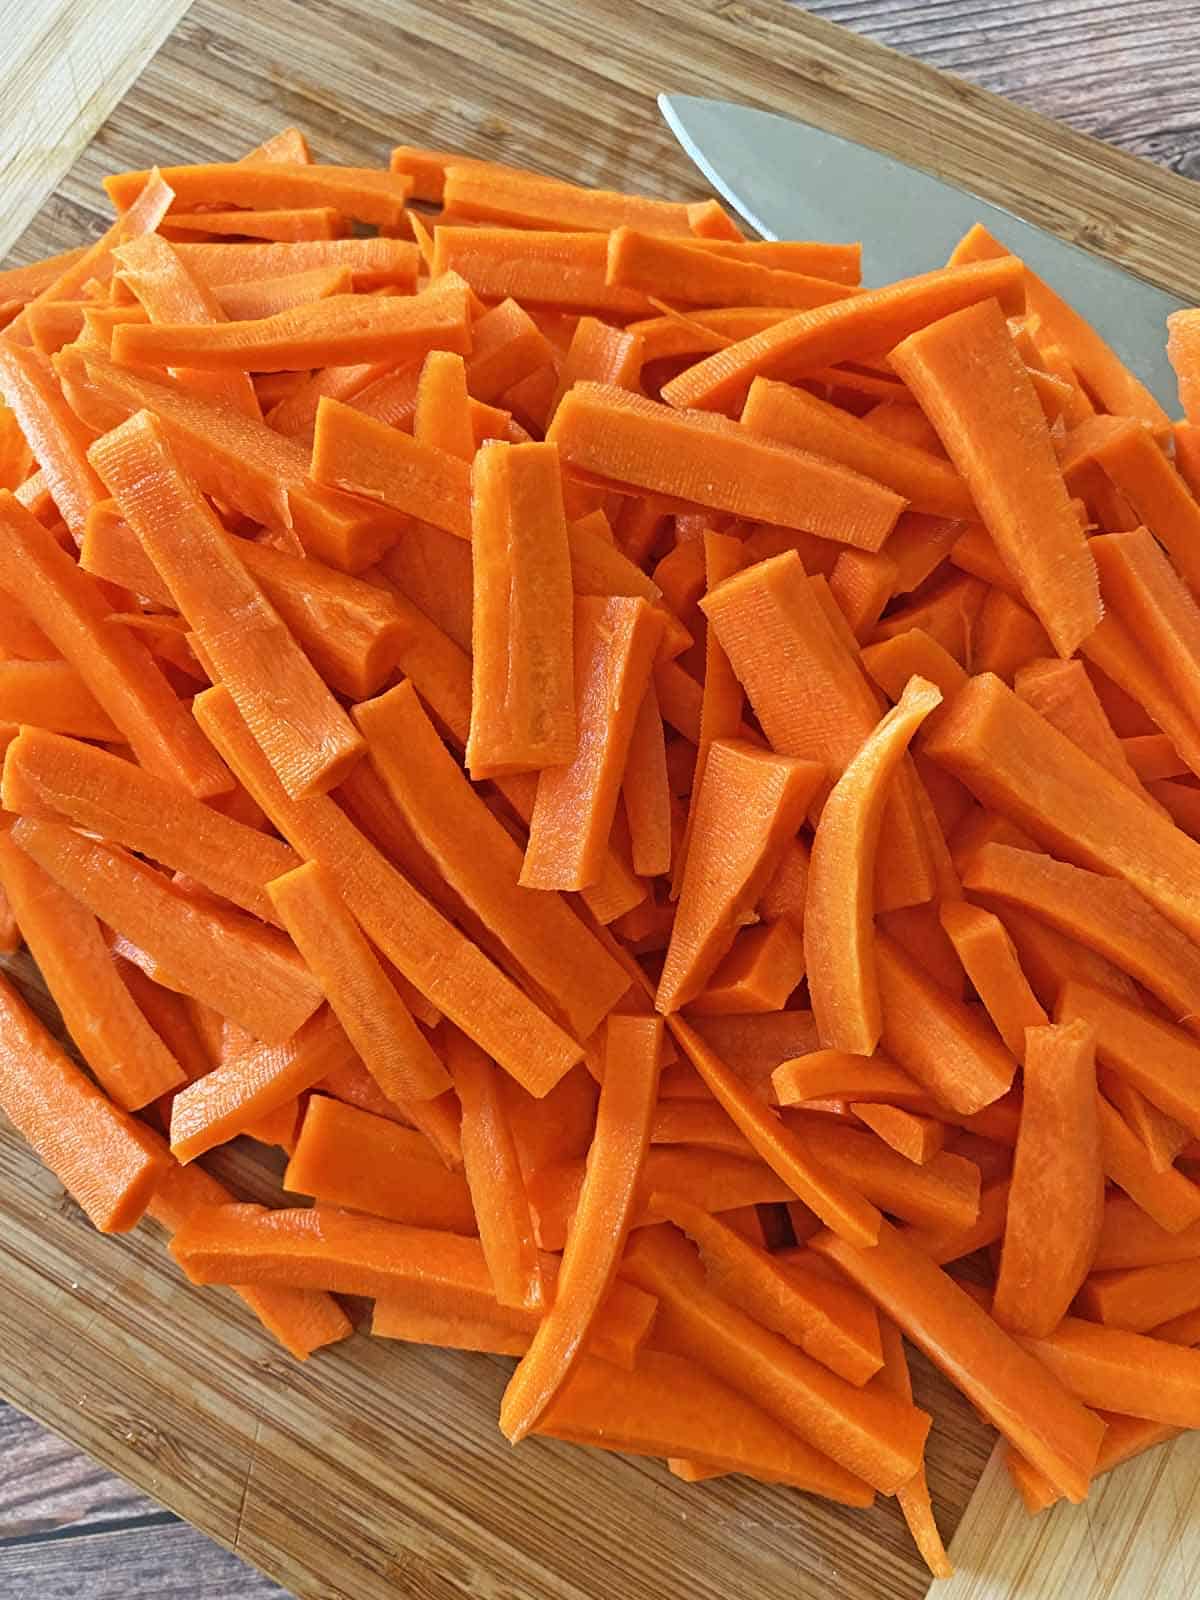 A pile of peeled, cut carrot sticks on a wood cutting board with a knife laid beside it.